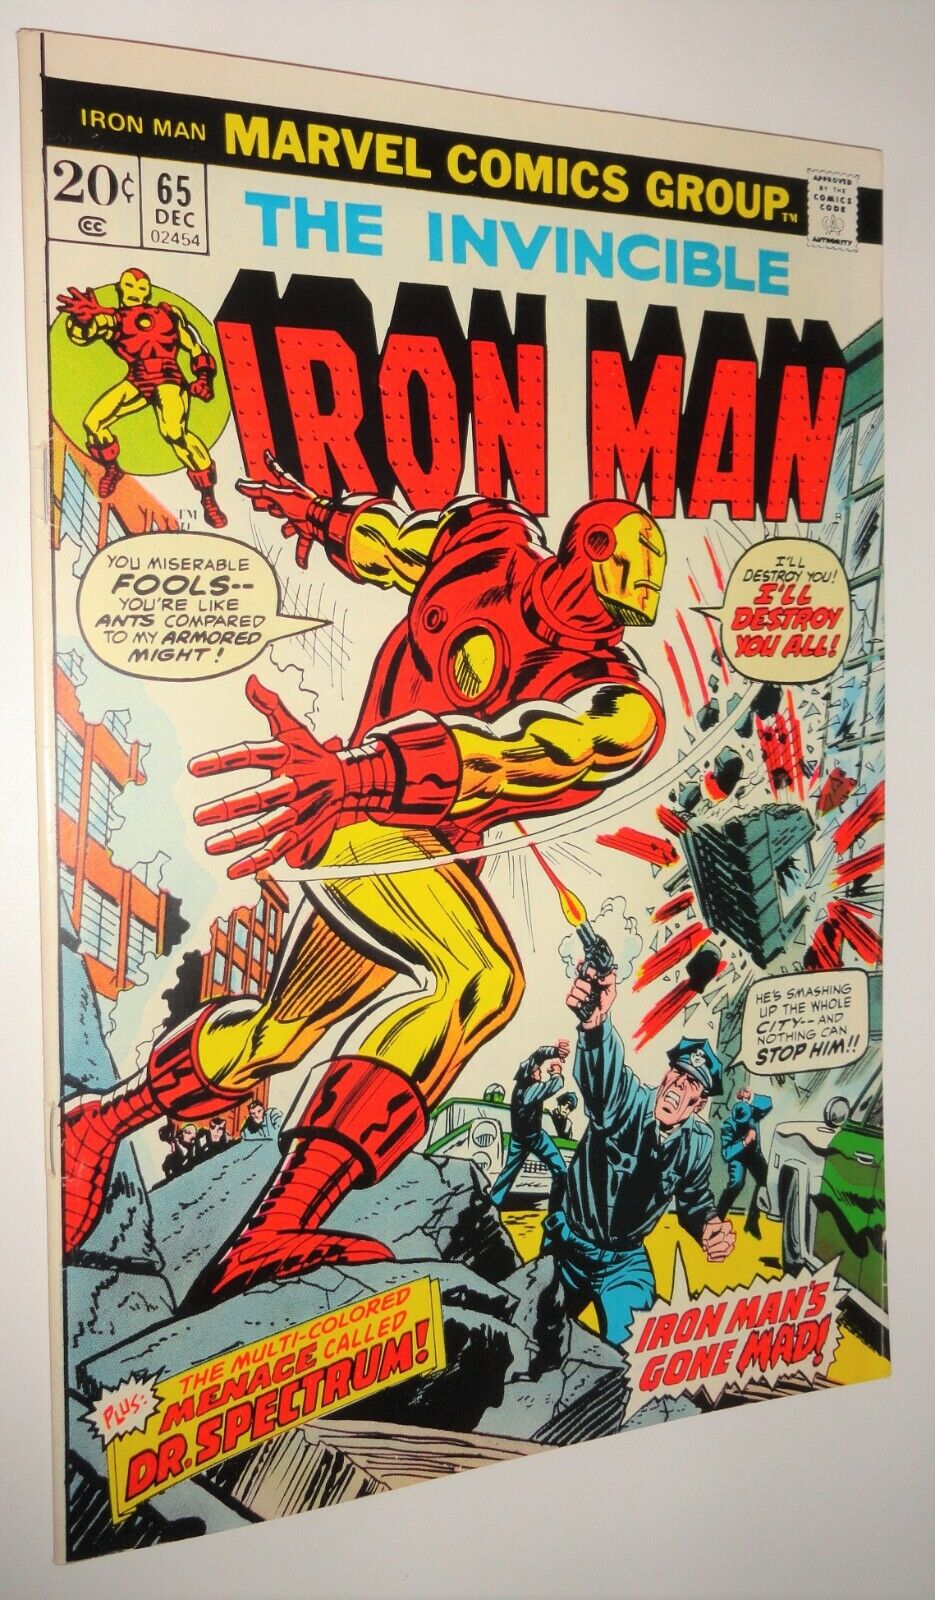 IRON-MAN #65 COOL COVER DR SPECTRUM 8.5/9.0 1973